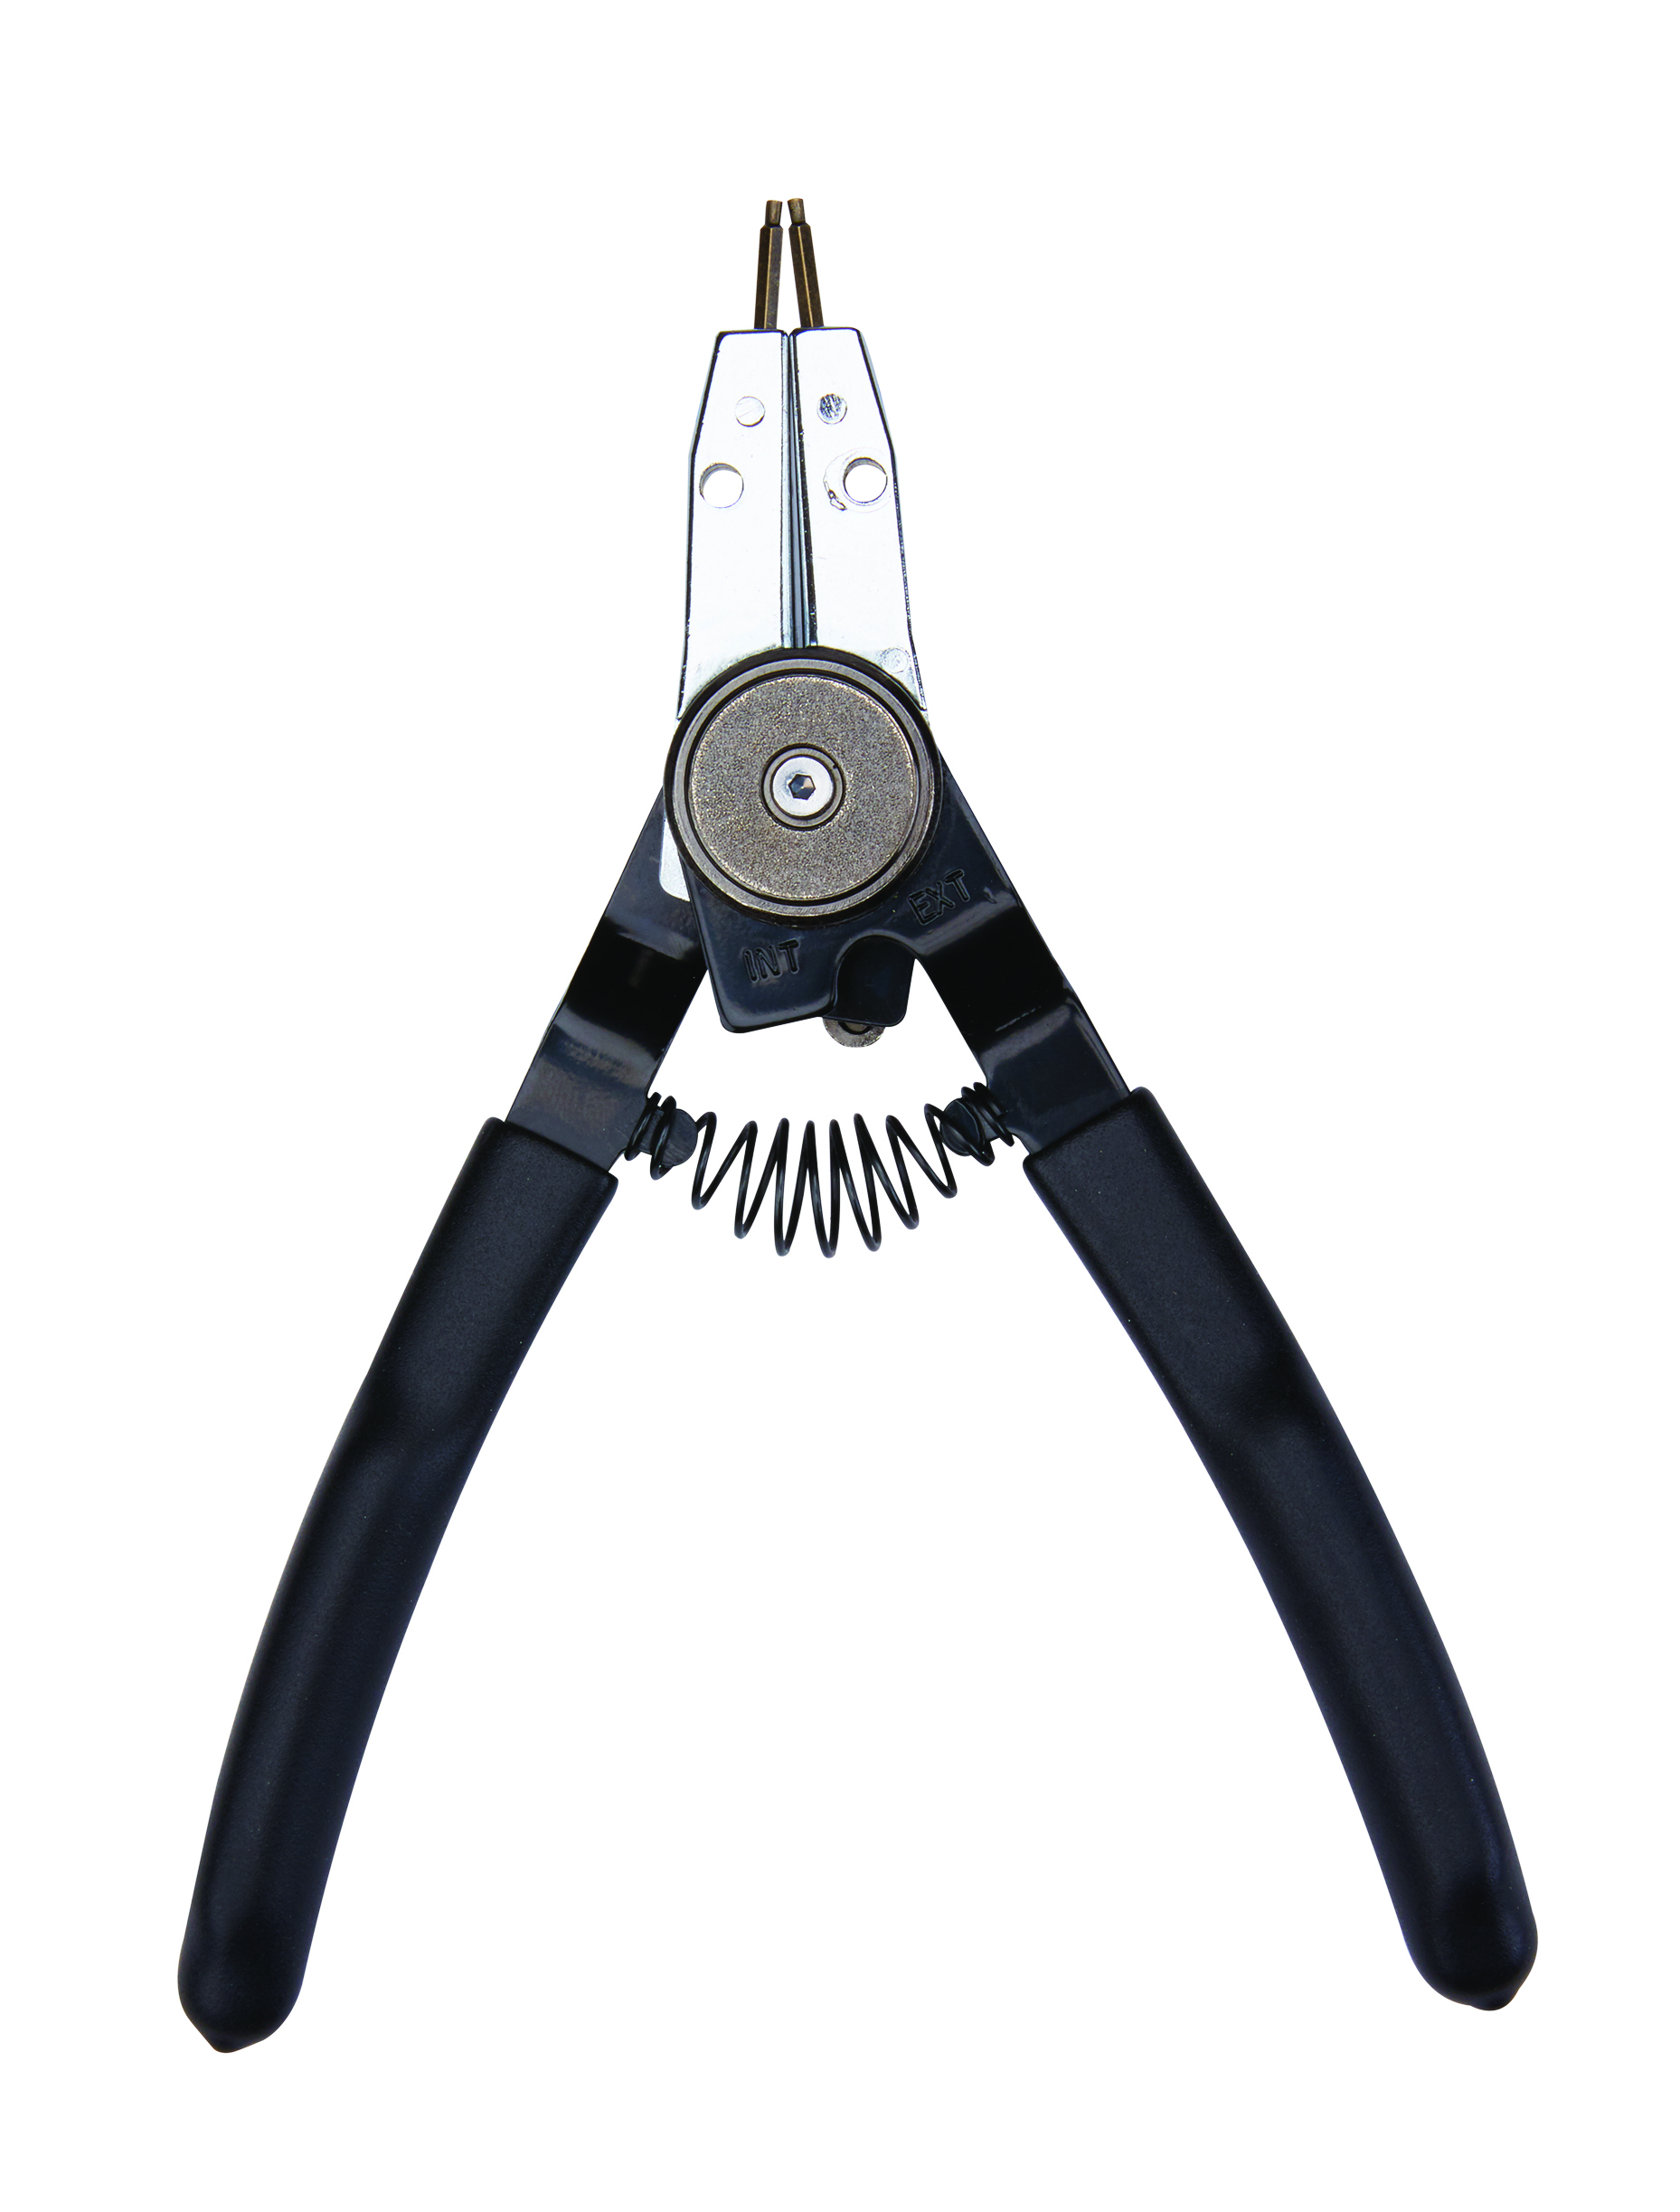 QUINN Snap Ring Pliers with Reversible Action Item 63938 Harbor